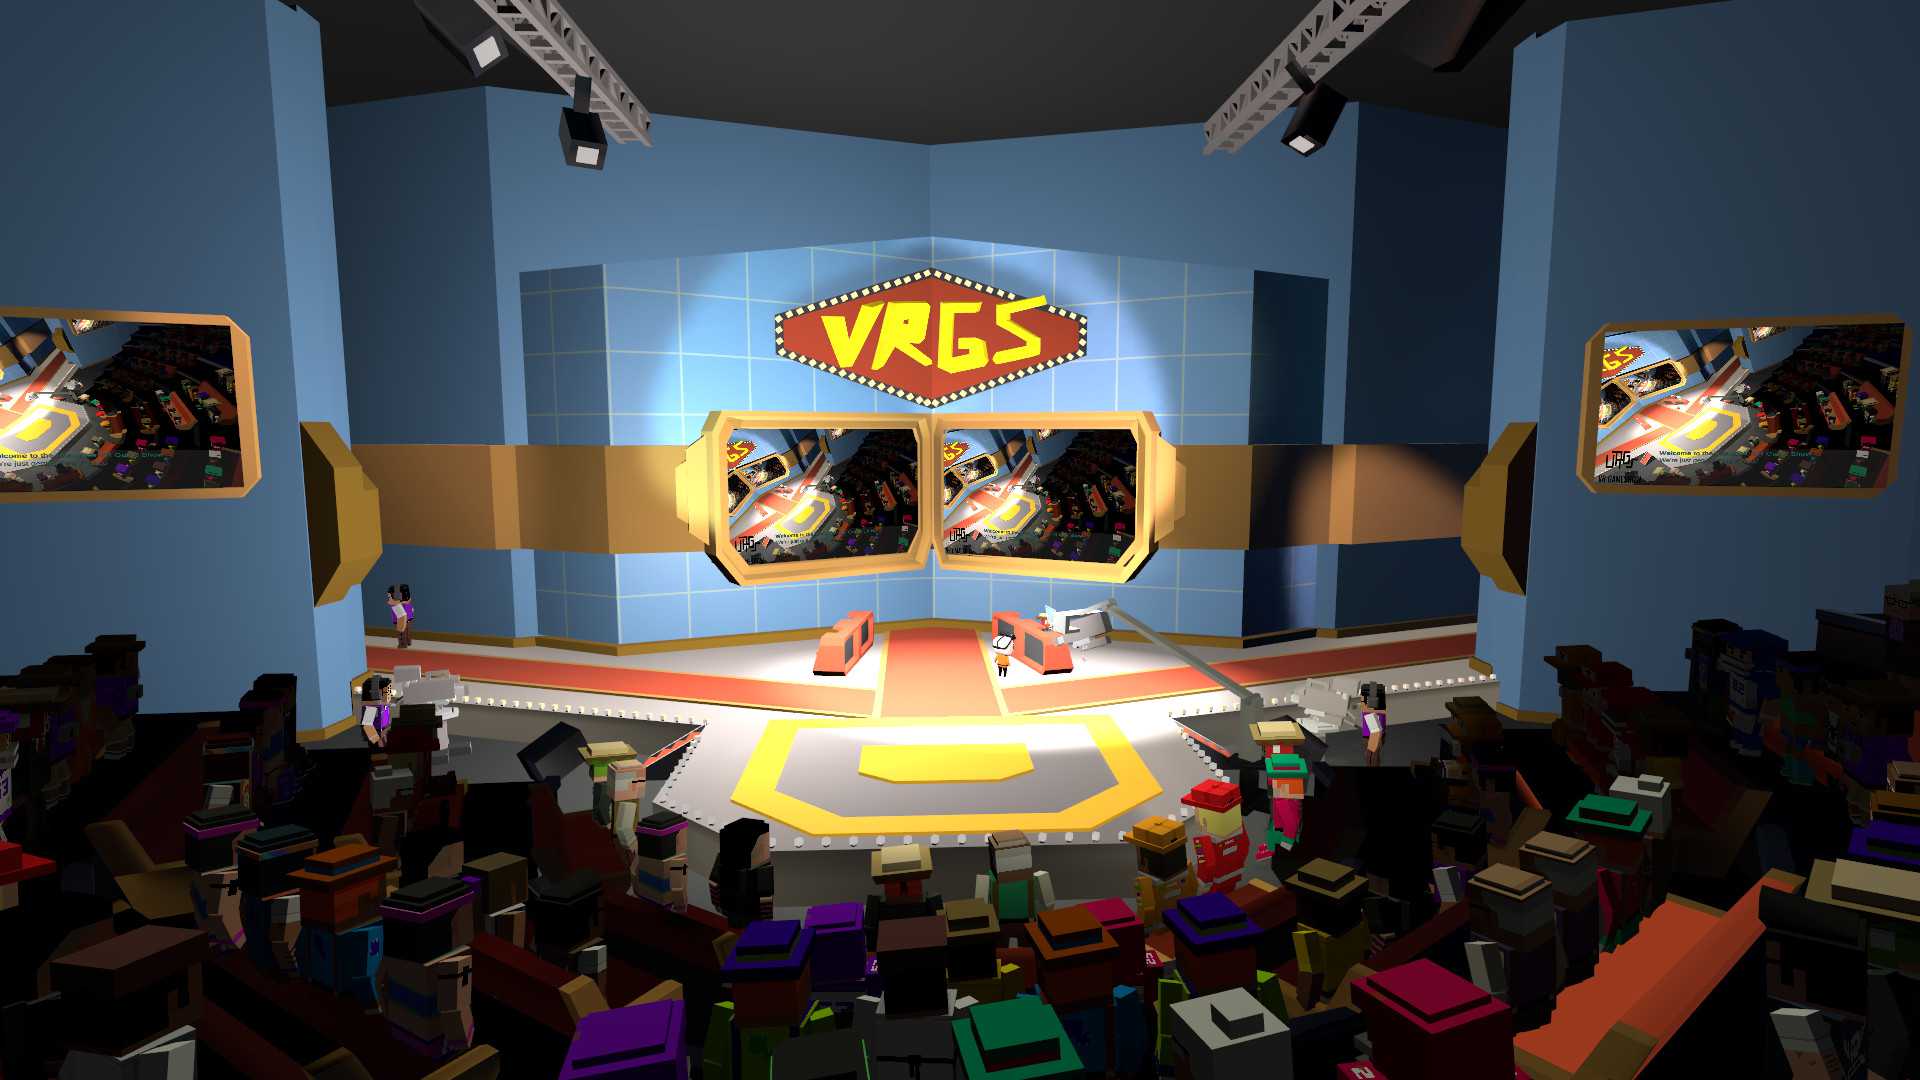 The Incredible VR Game Show